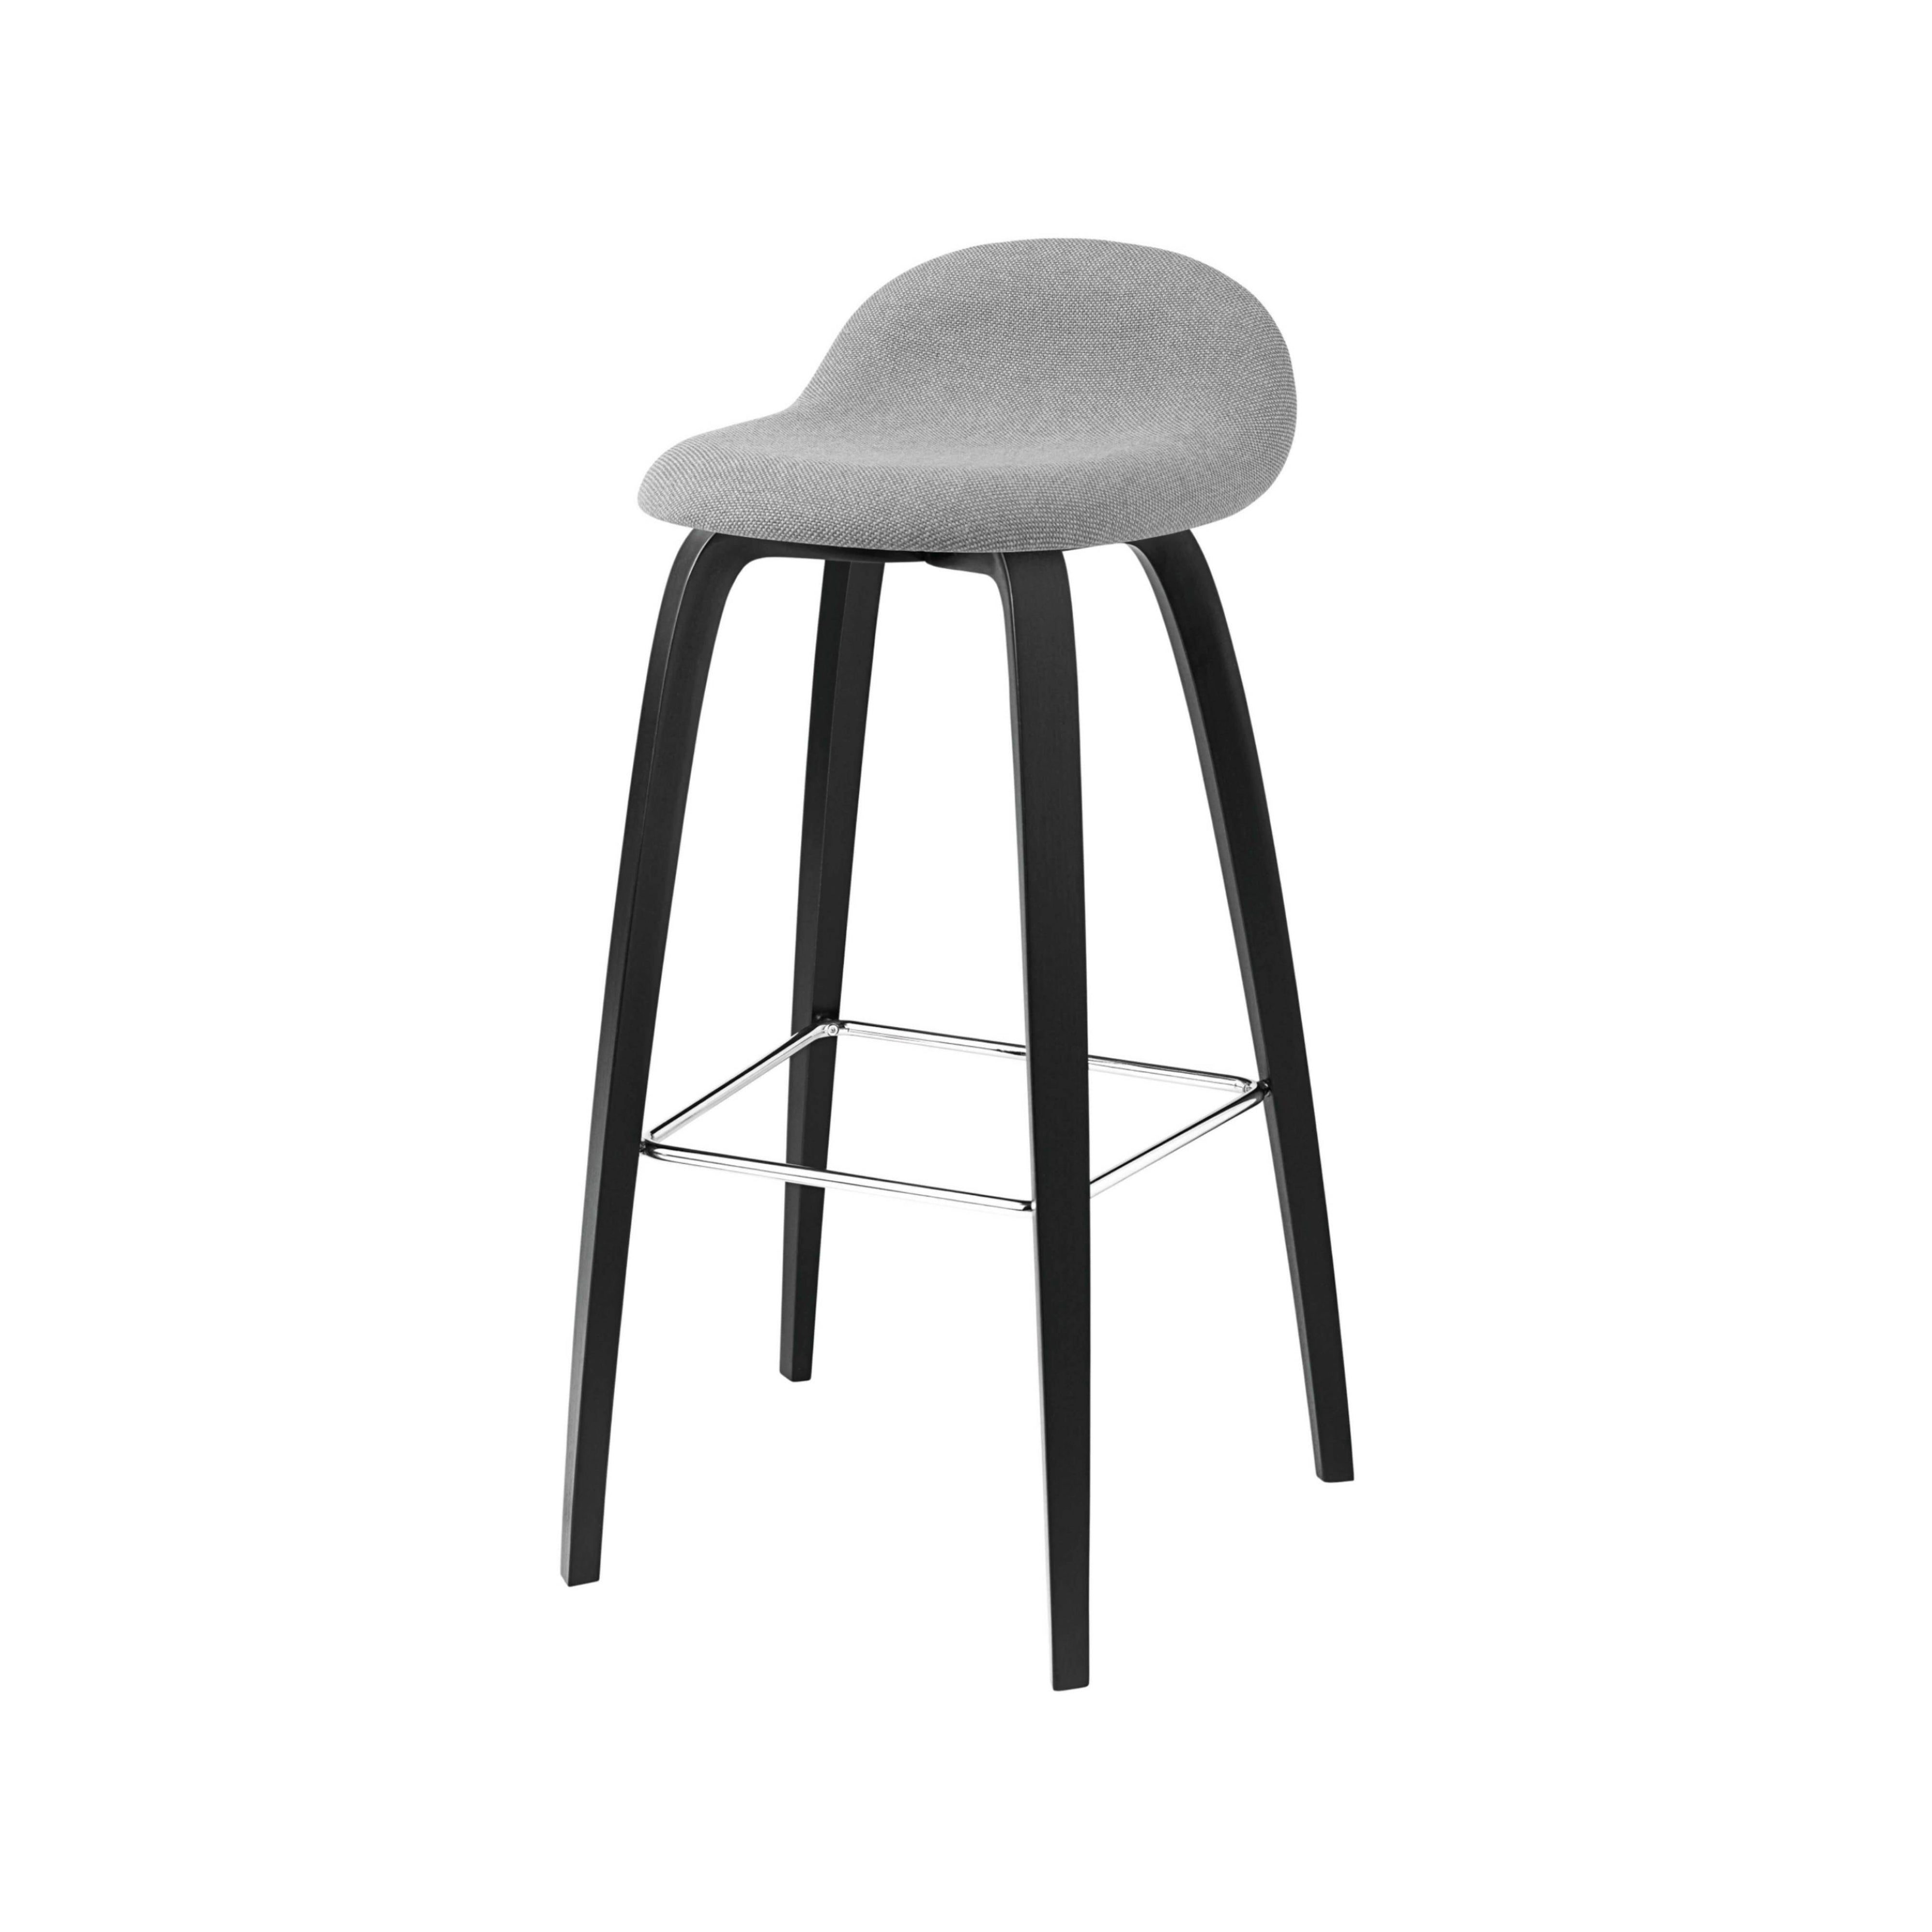 3D Bar + Counter Stool: Wood Base + Full Upholstery + Counter + Black Stained Beech